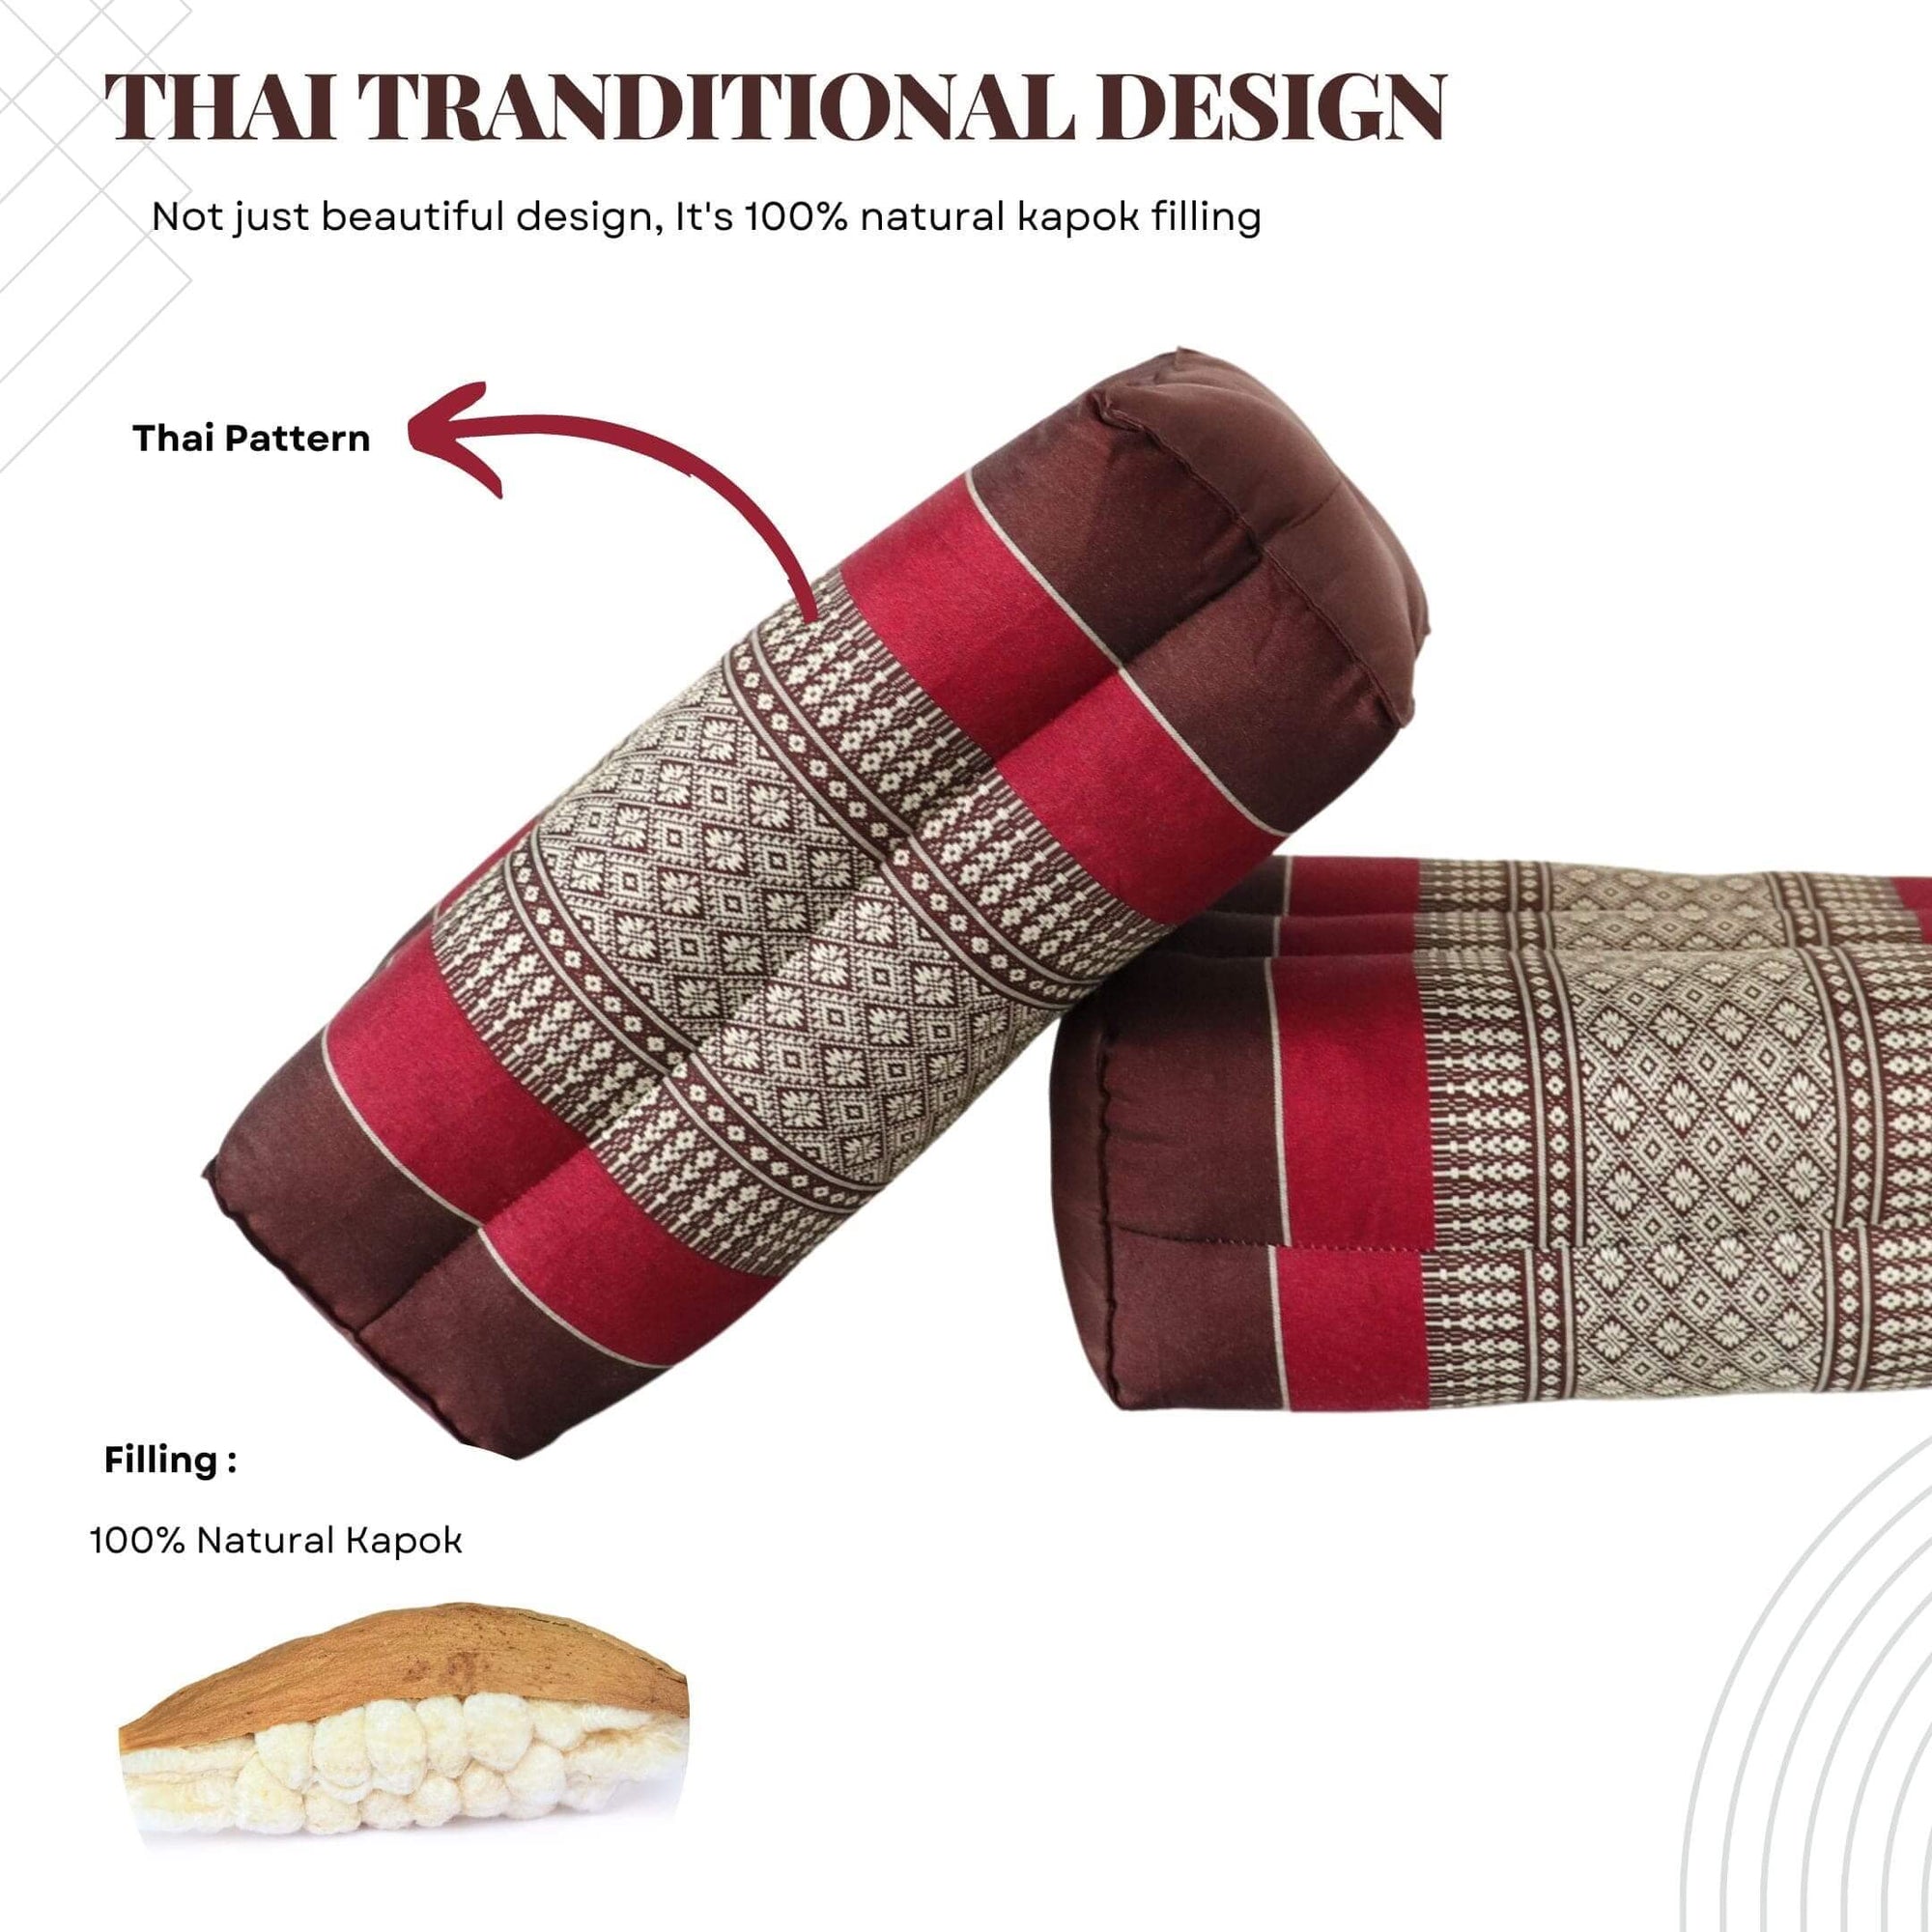 THAIHOME Cushion CHA RIN THIP - Thai Kapok Yoga Pillow - Firm and Comfortable Support for Yoga, Pilates, and Meditation